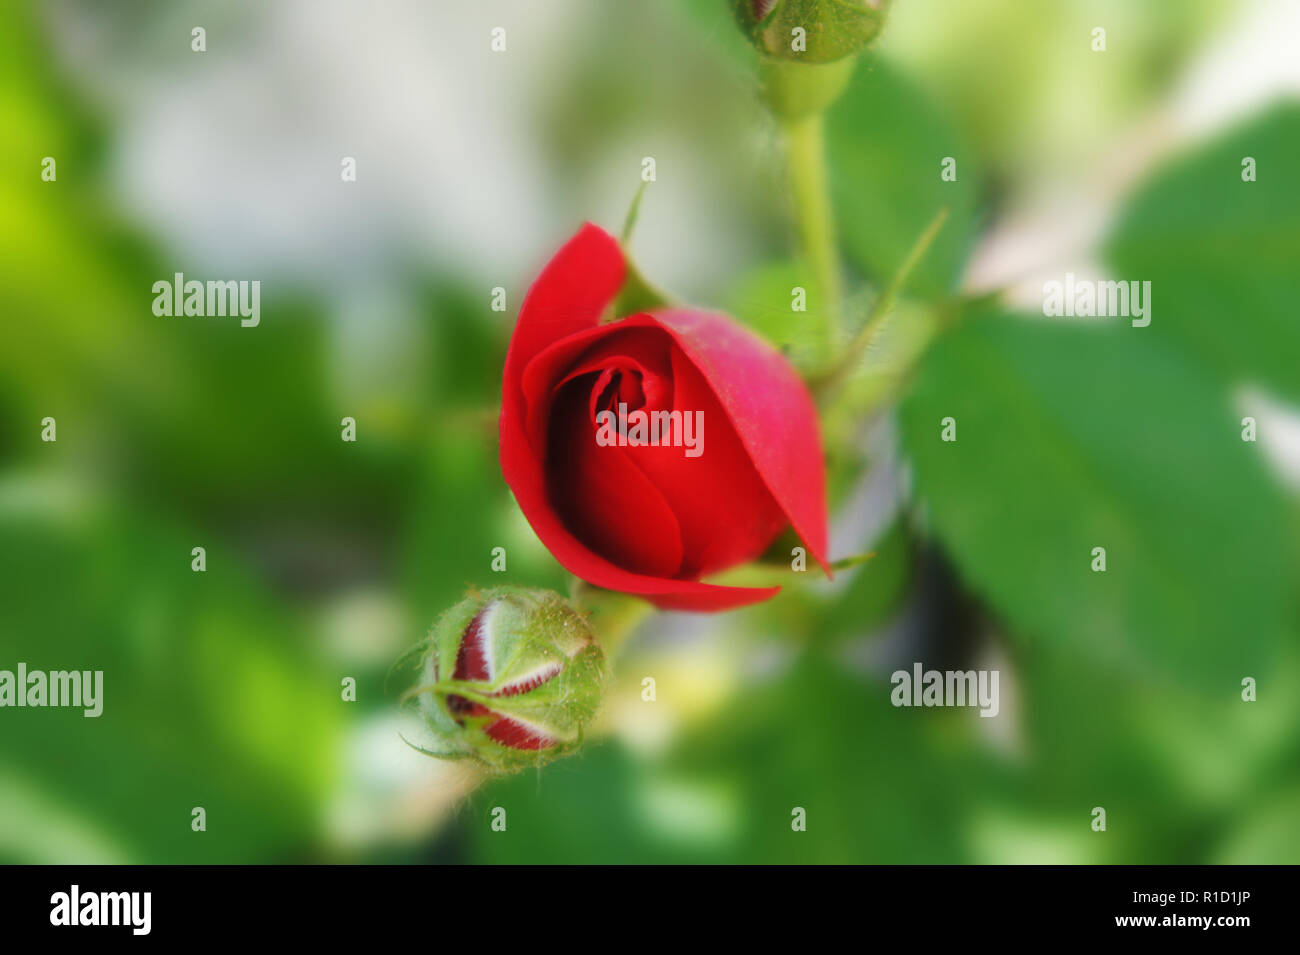 unopened flower close up. colorful bud. red rose bud growing on a bush with greenery in the background. Stock Photo